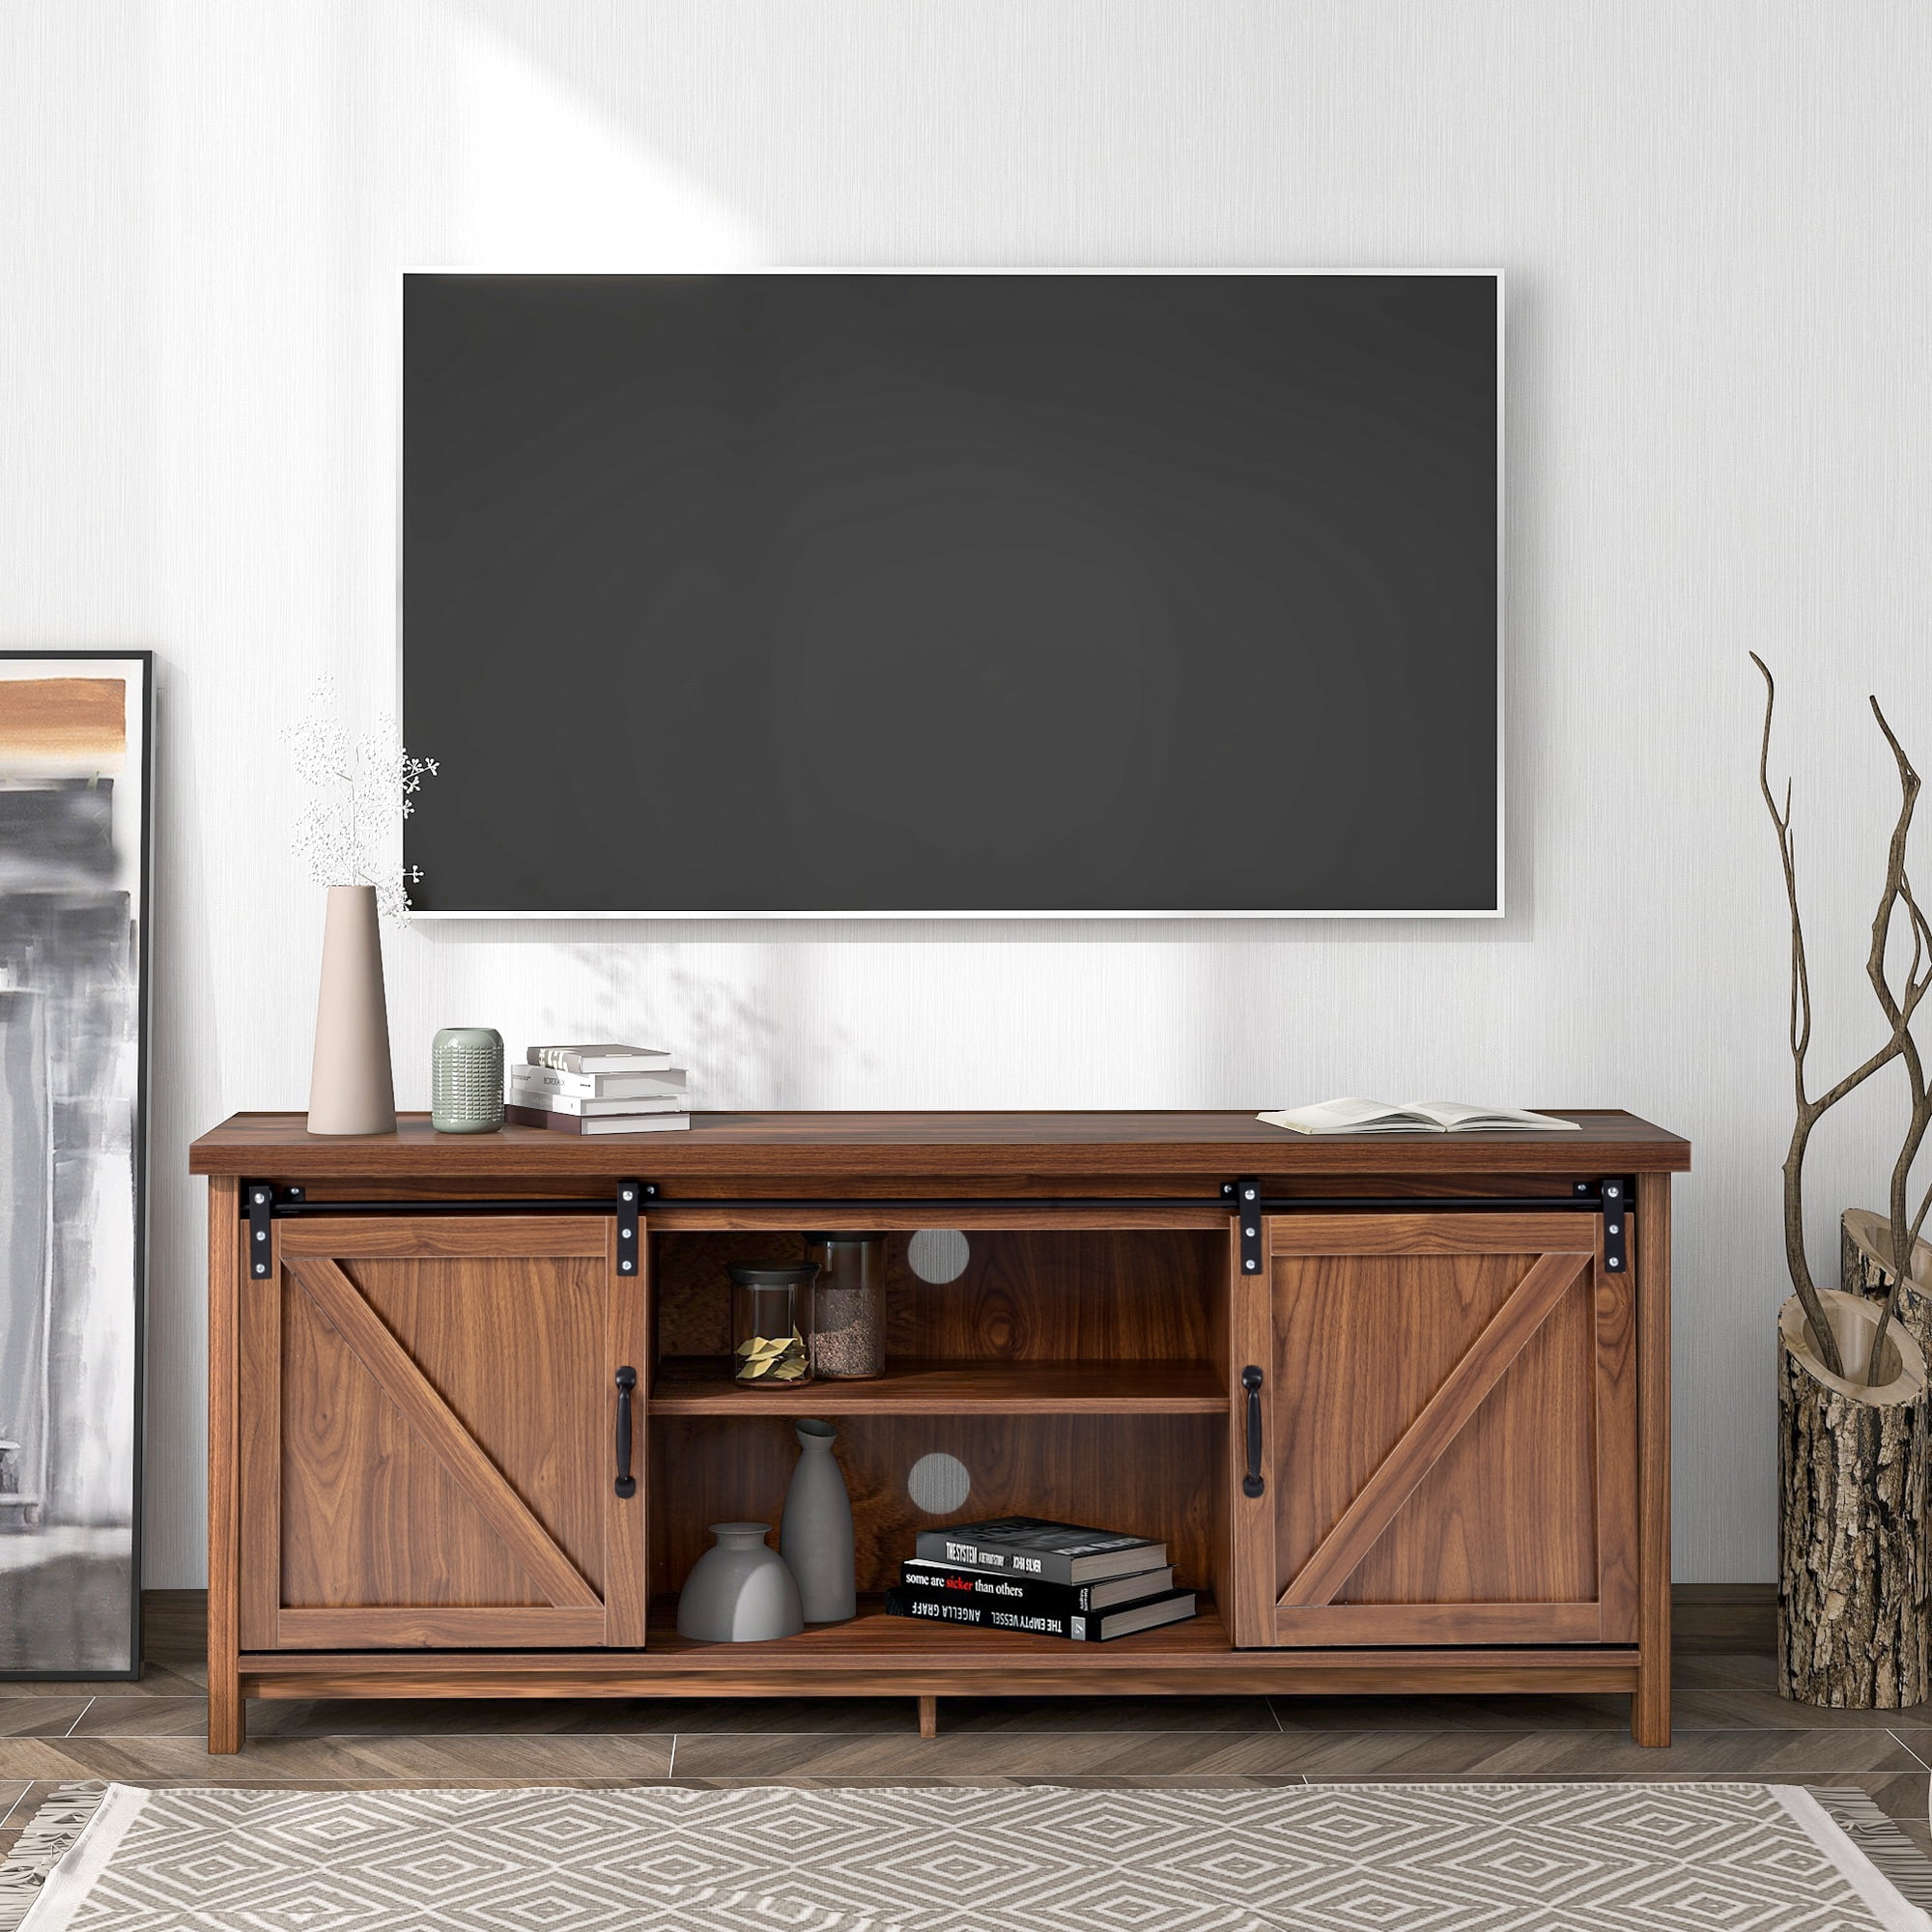 Details about   Universal TV Stand Table Storage Shelf Home Entertainment Center Media Console 